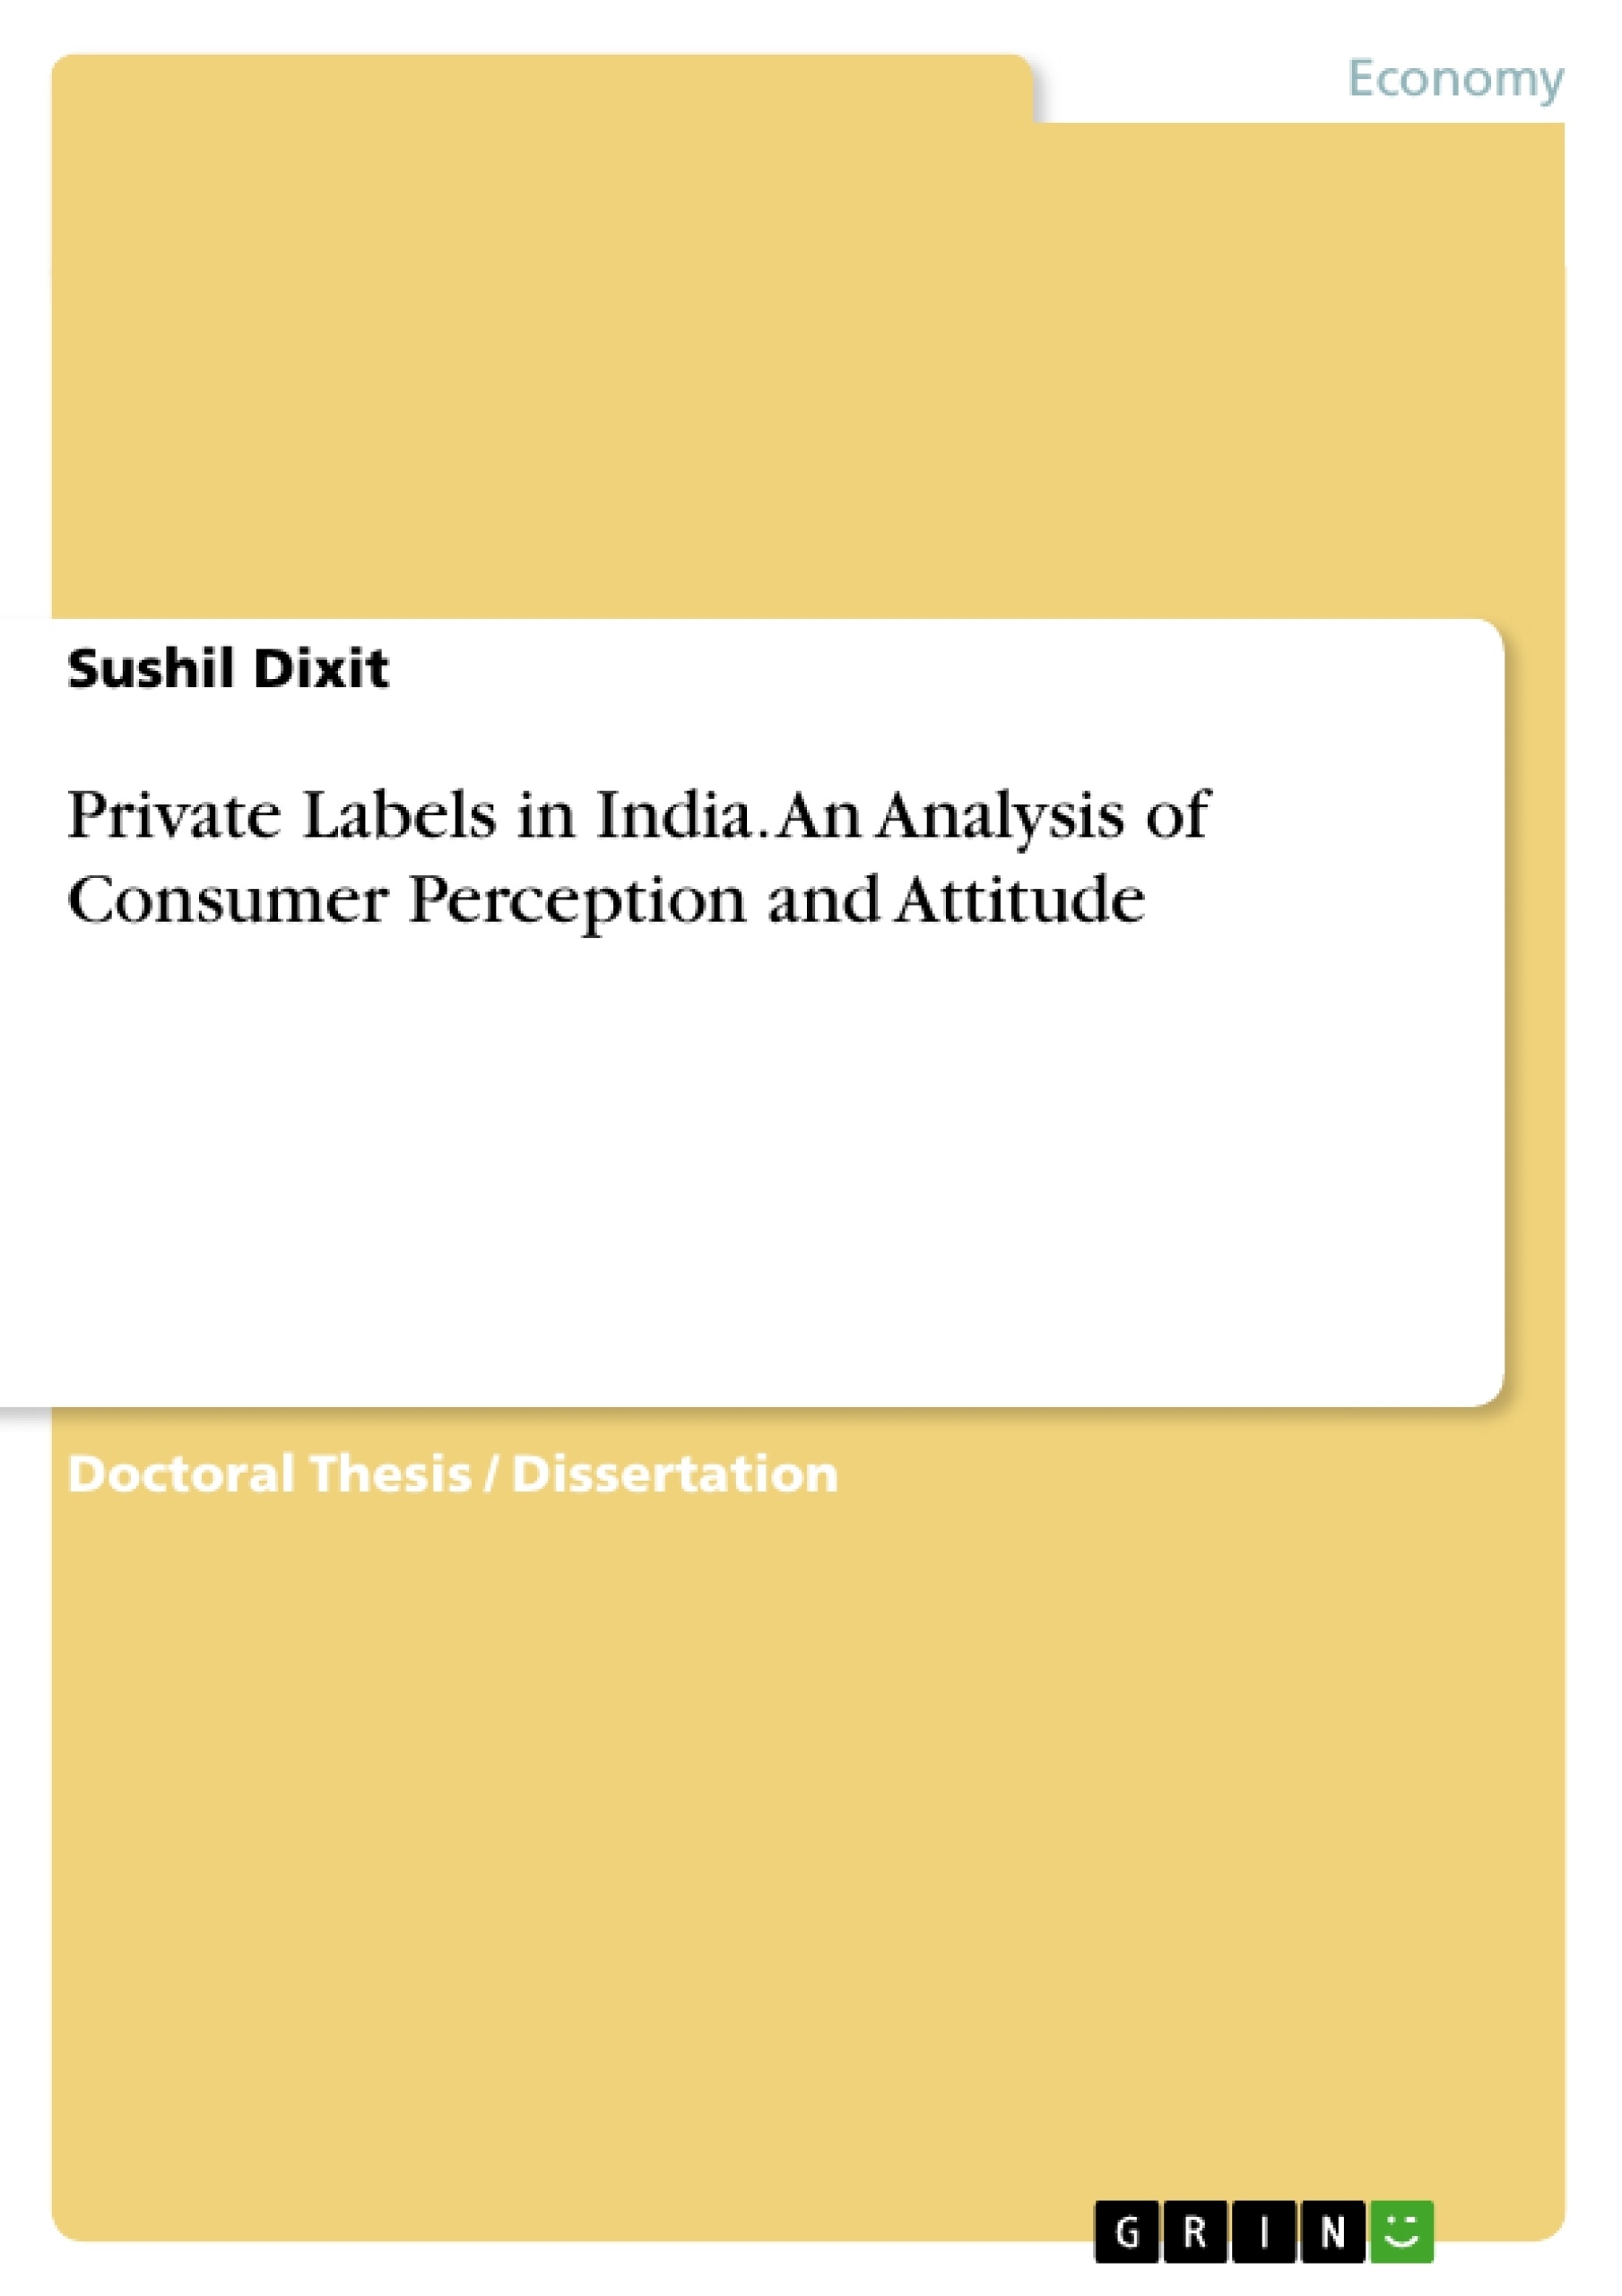 Titel: Private Labels in India. An Analysis of Consumer Perception and Attitude